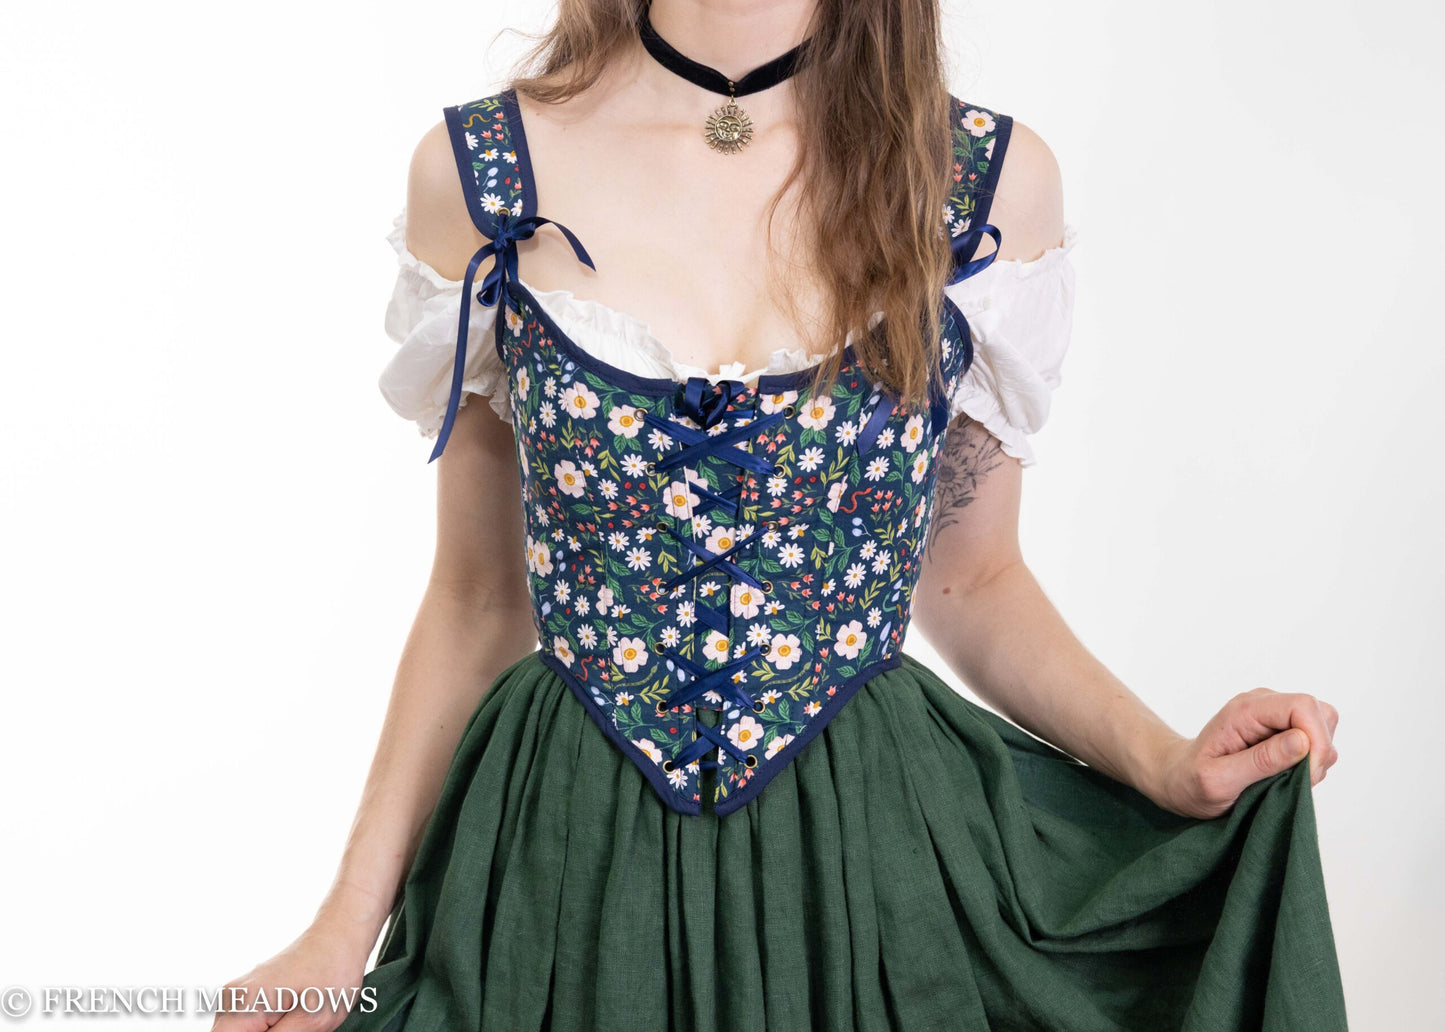 Load image into Gallery viewer, READY TO SHIP Garden Snakes Blue Floral Renaissance Bodice
